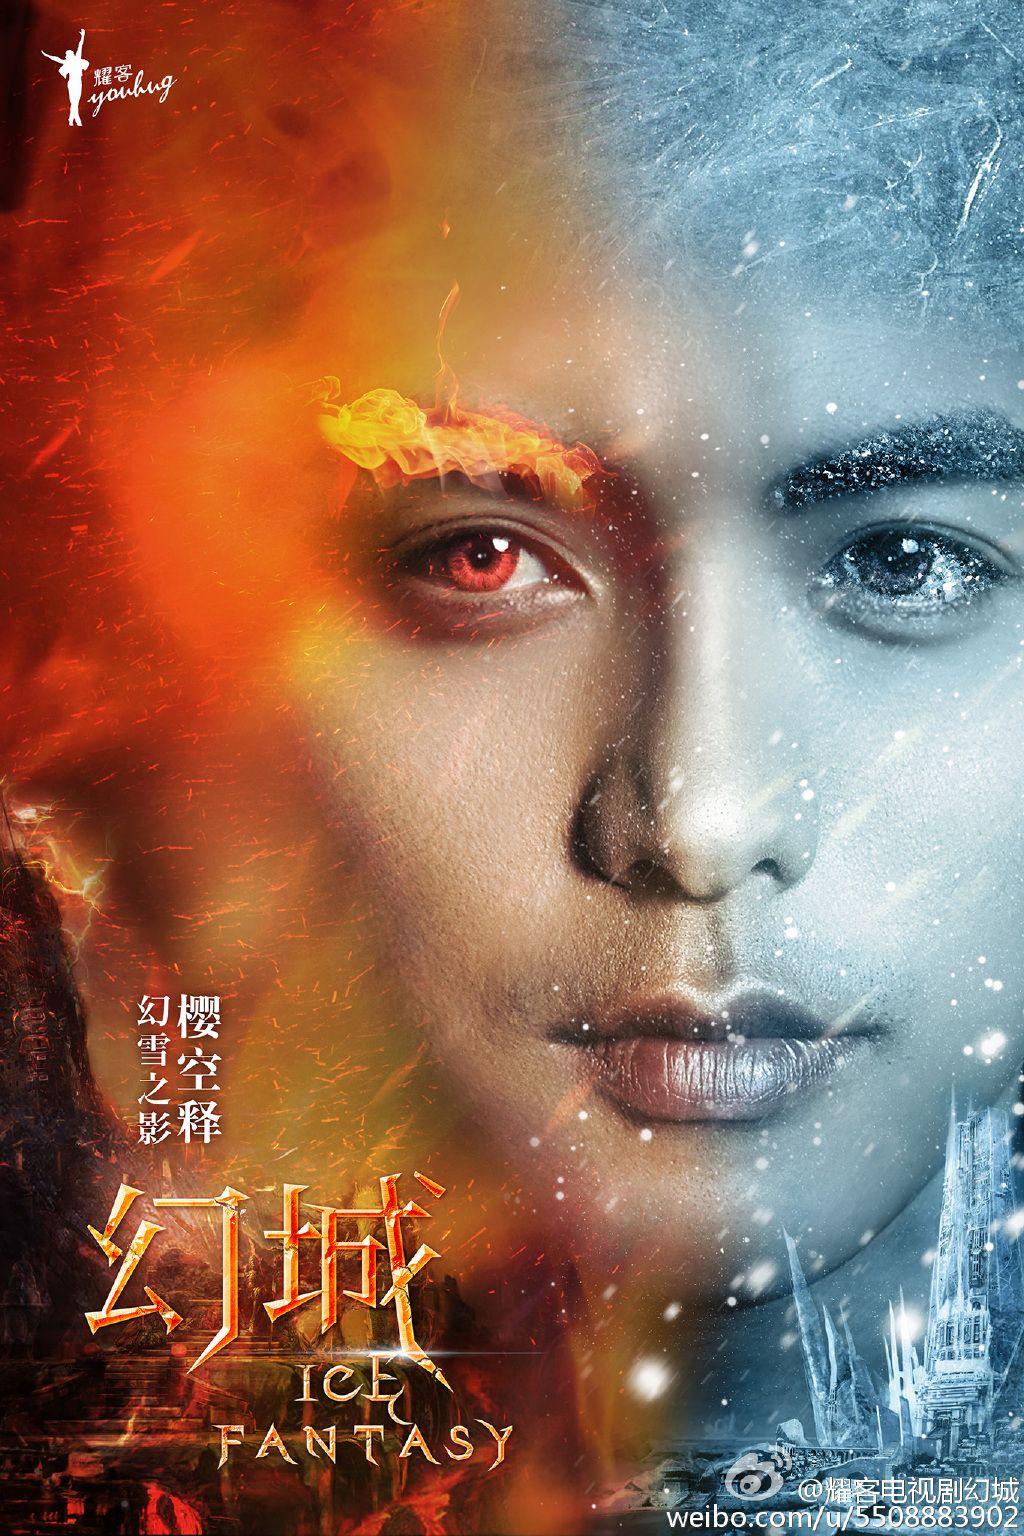 Ice Fantasy 《幻城》 Shao Feng, Victoria Song, Ma Tian Yu